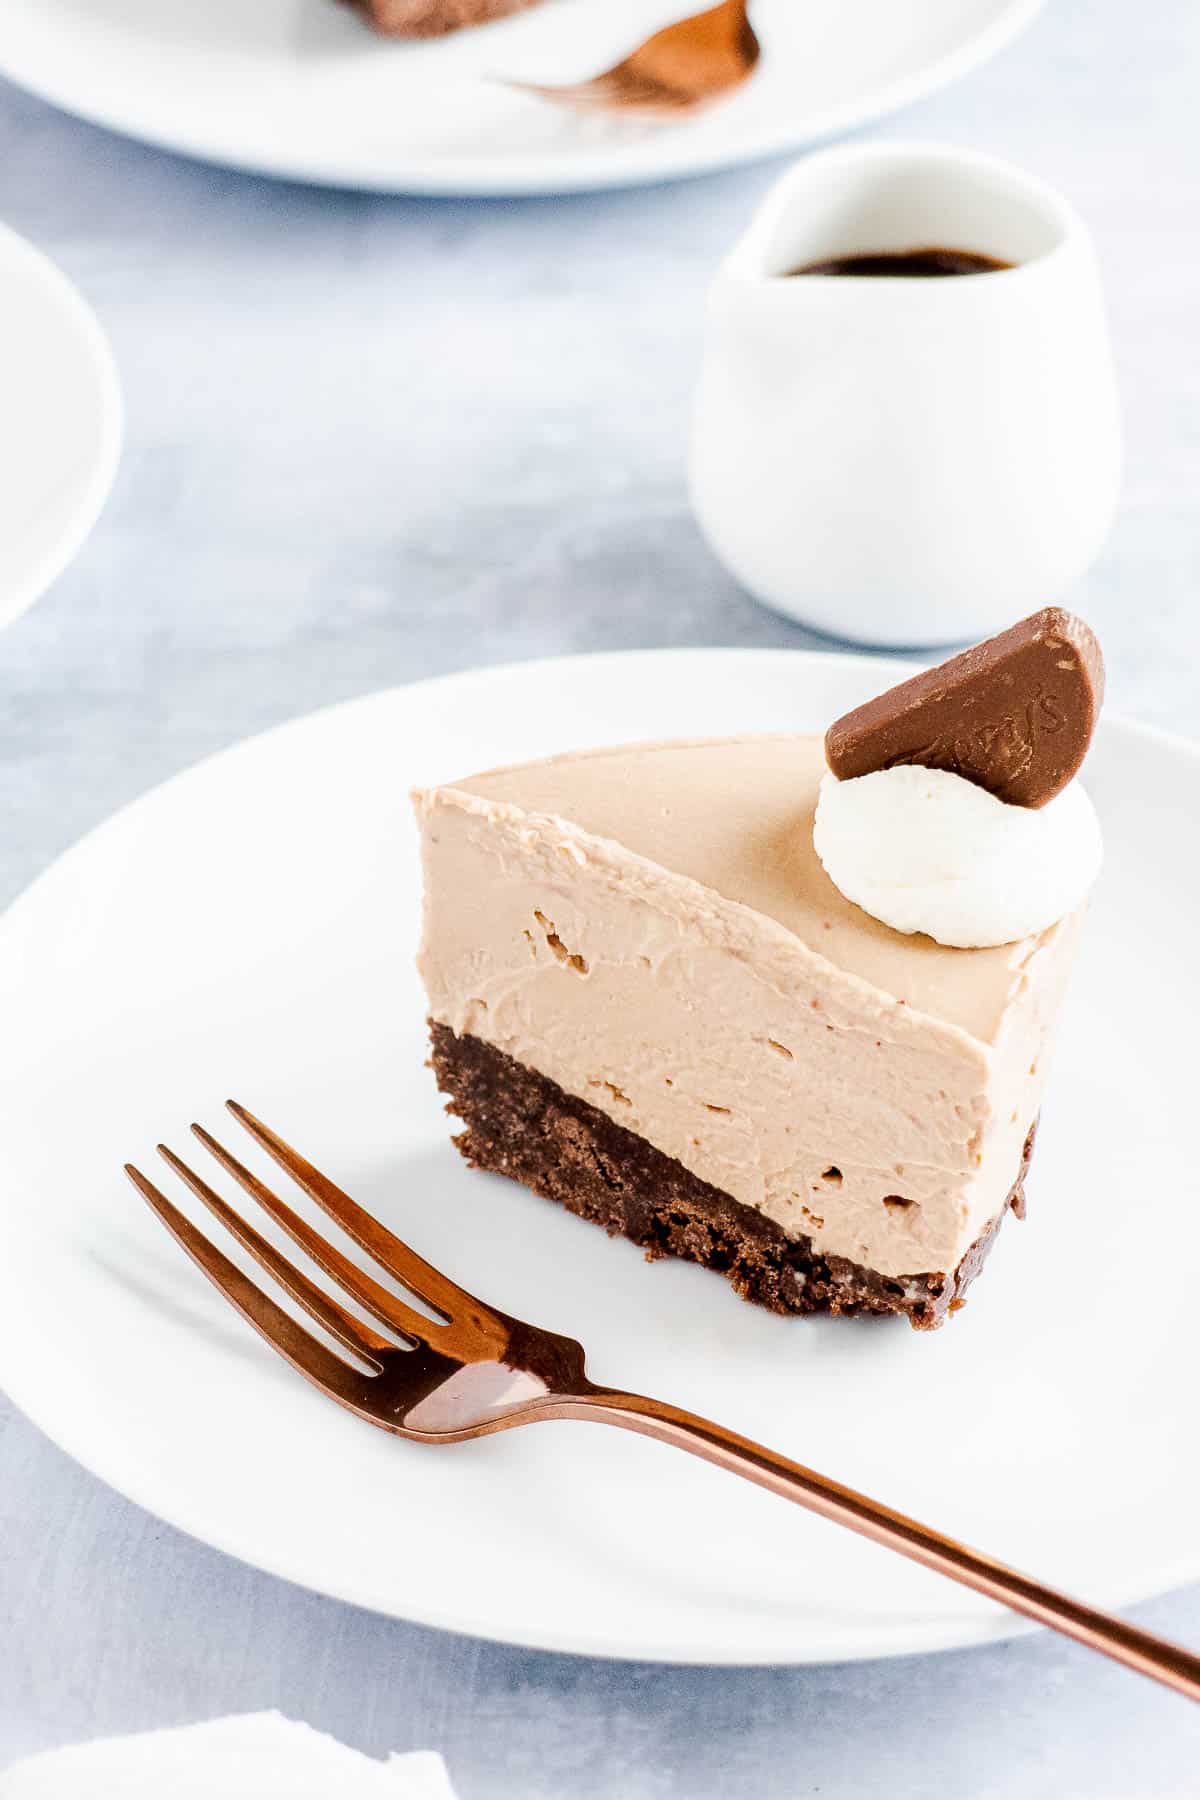 Slice of chocolate cheesecake on a white plate with a fork next to it